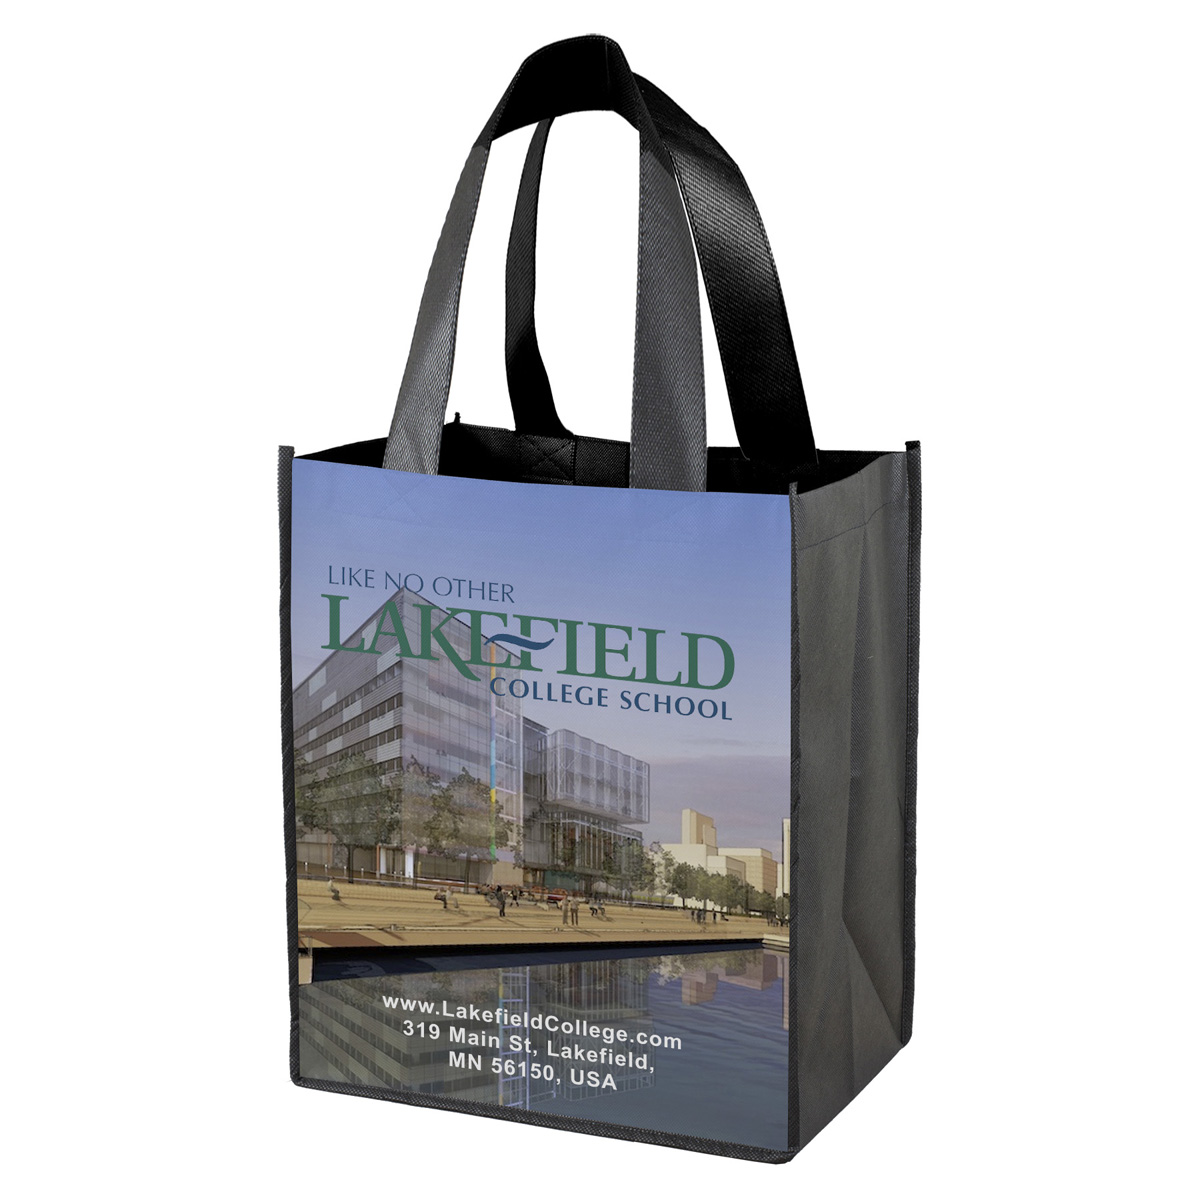 “GALLERIA” 12” W x 13” H Full Color Import Air Ship Grocery Shopping Tote Bags